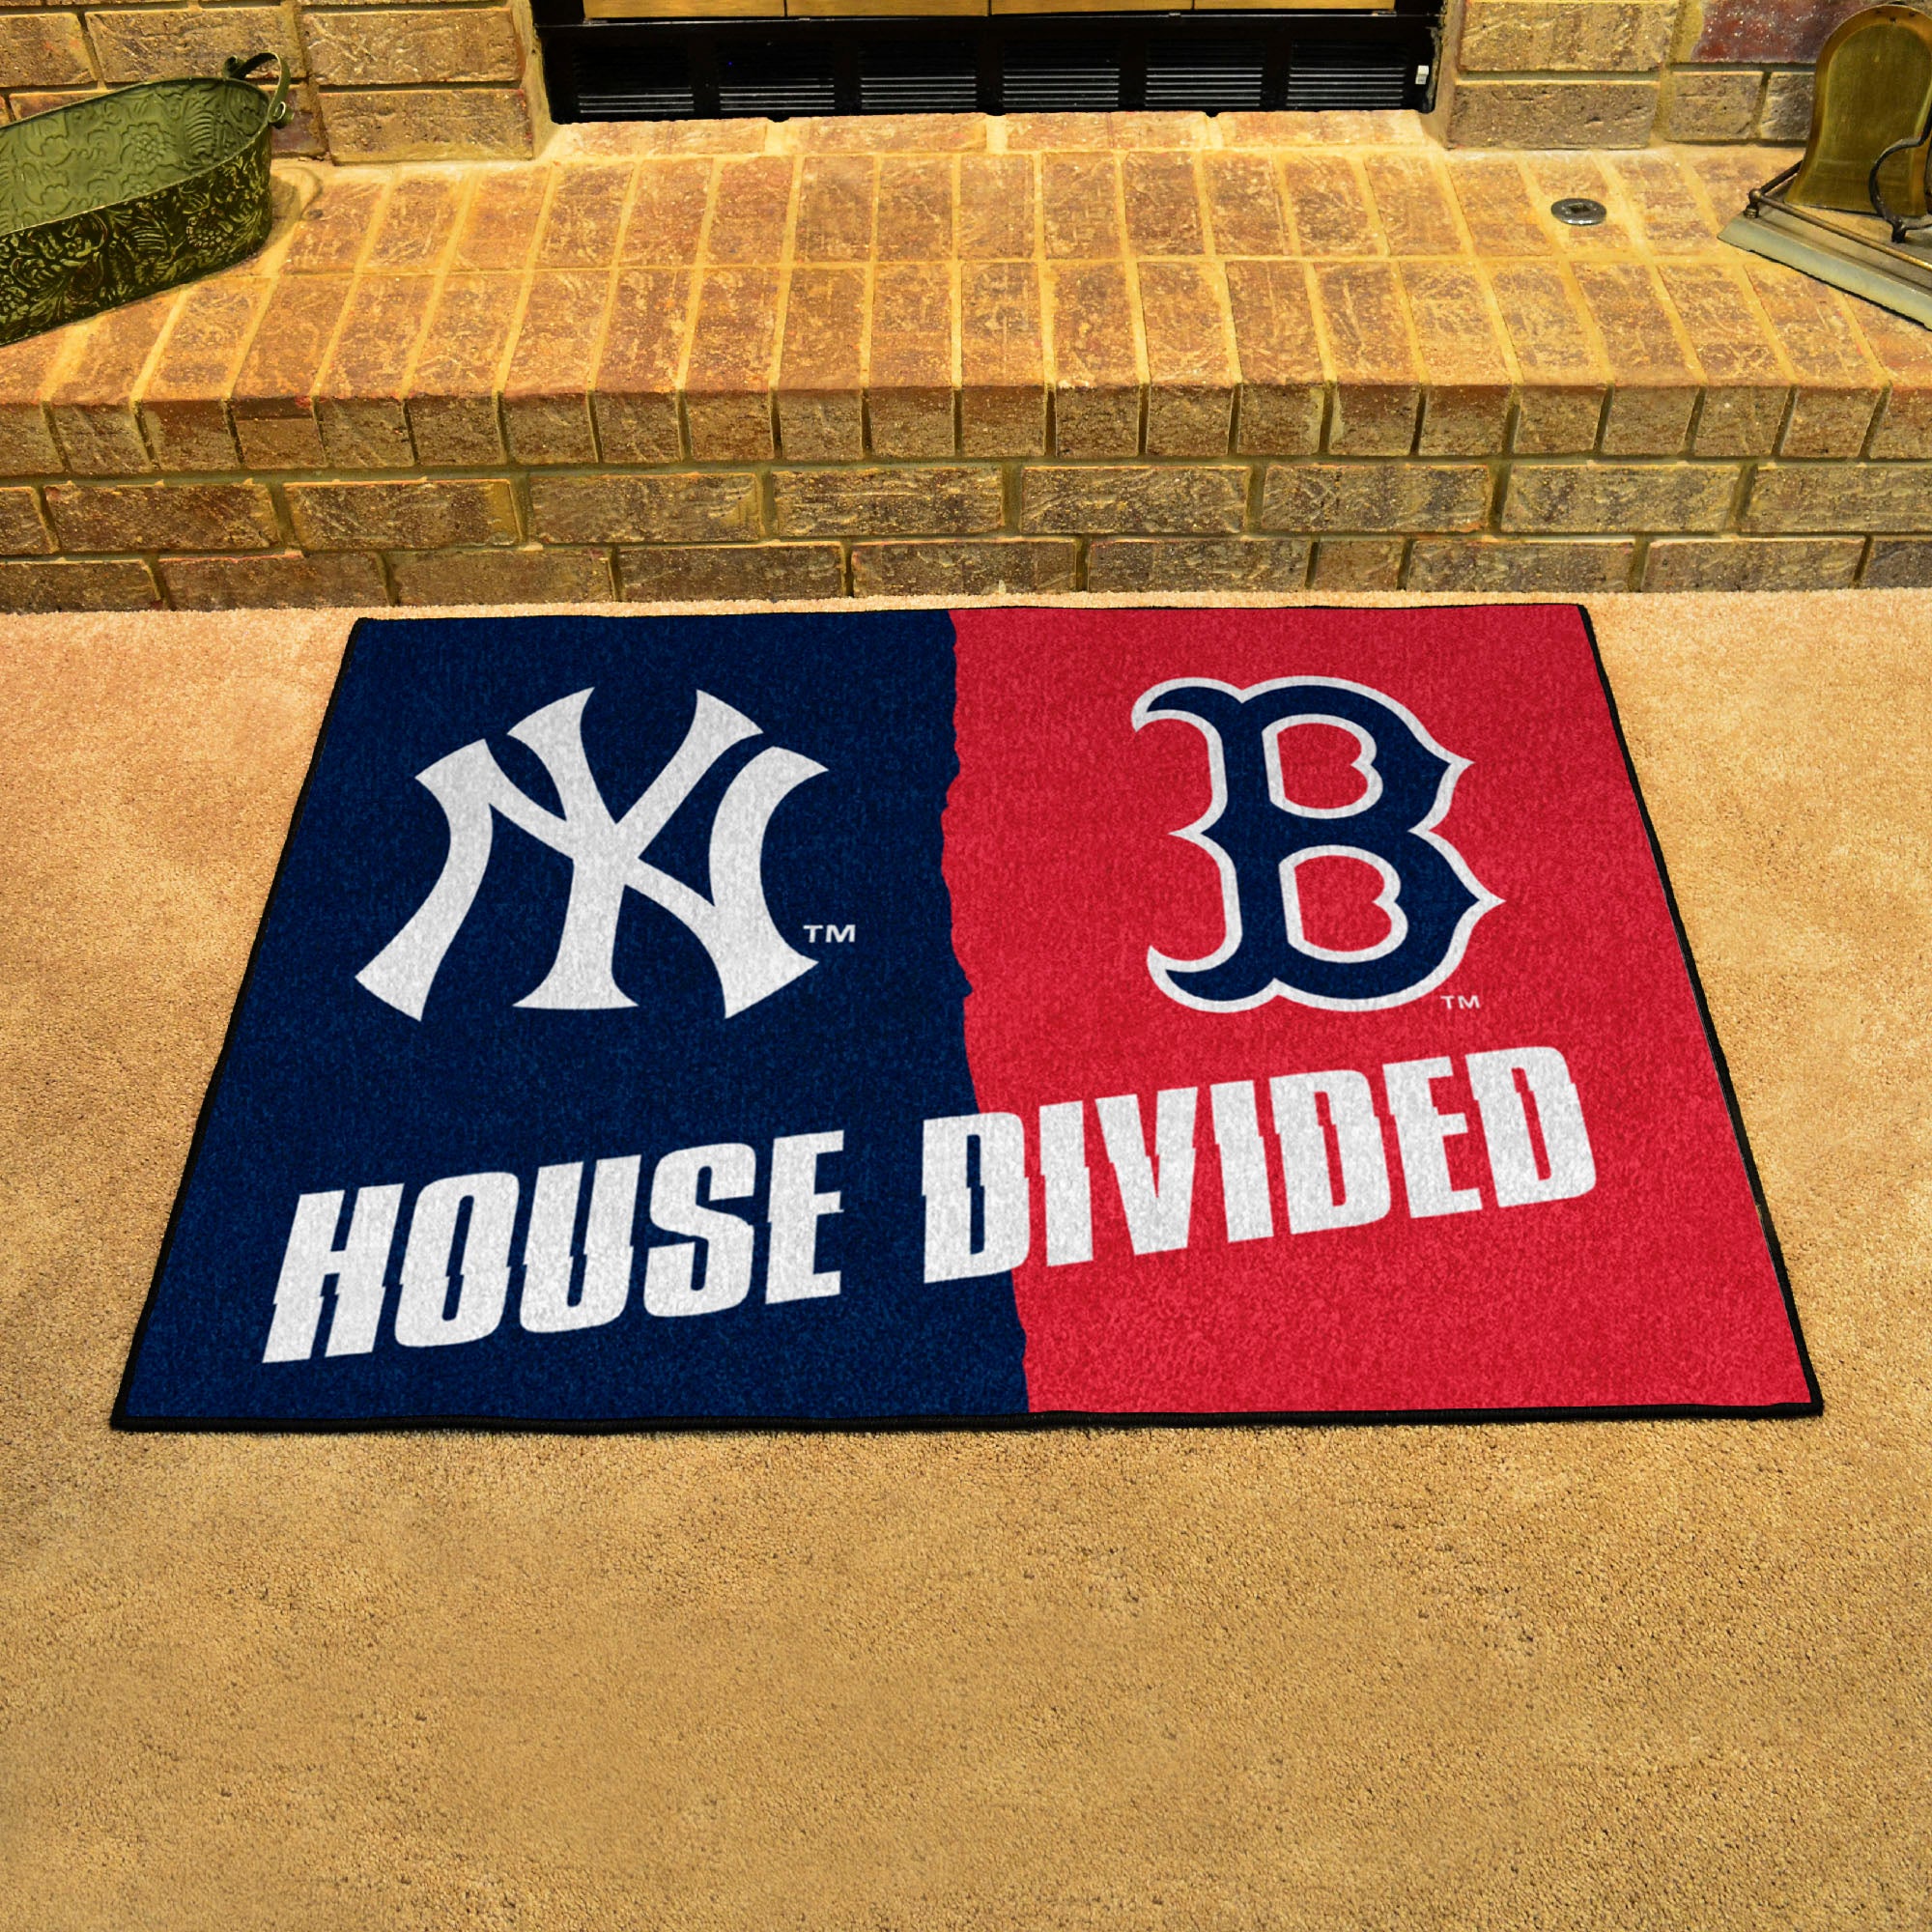 FANMATS, MLB House Divided - Yankees / Red Sox House Divided Rug